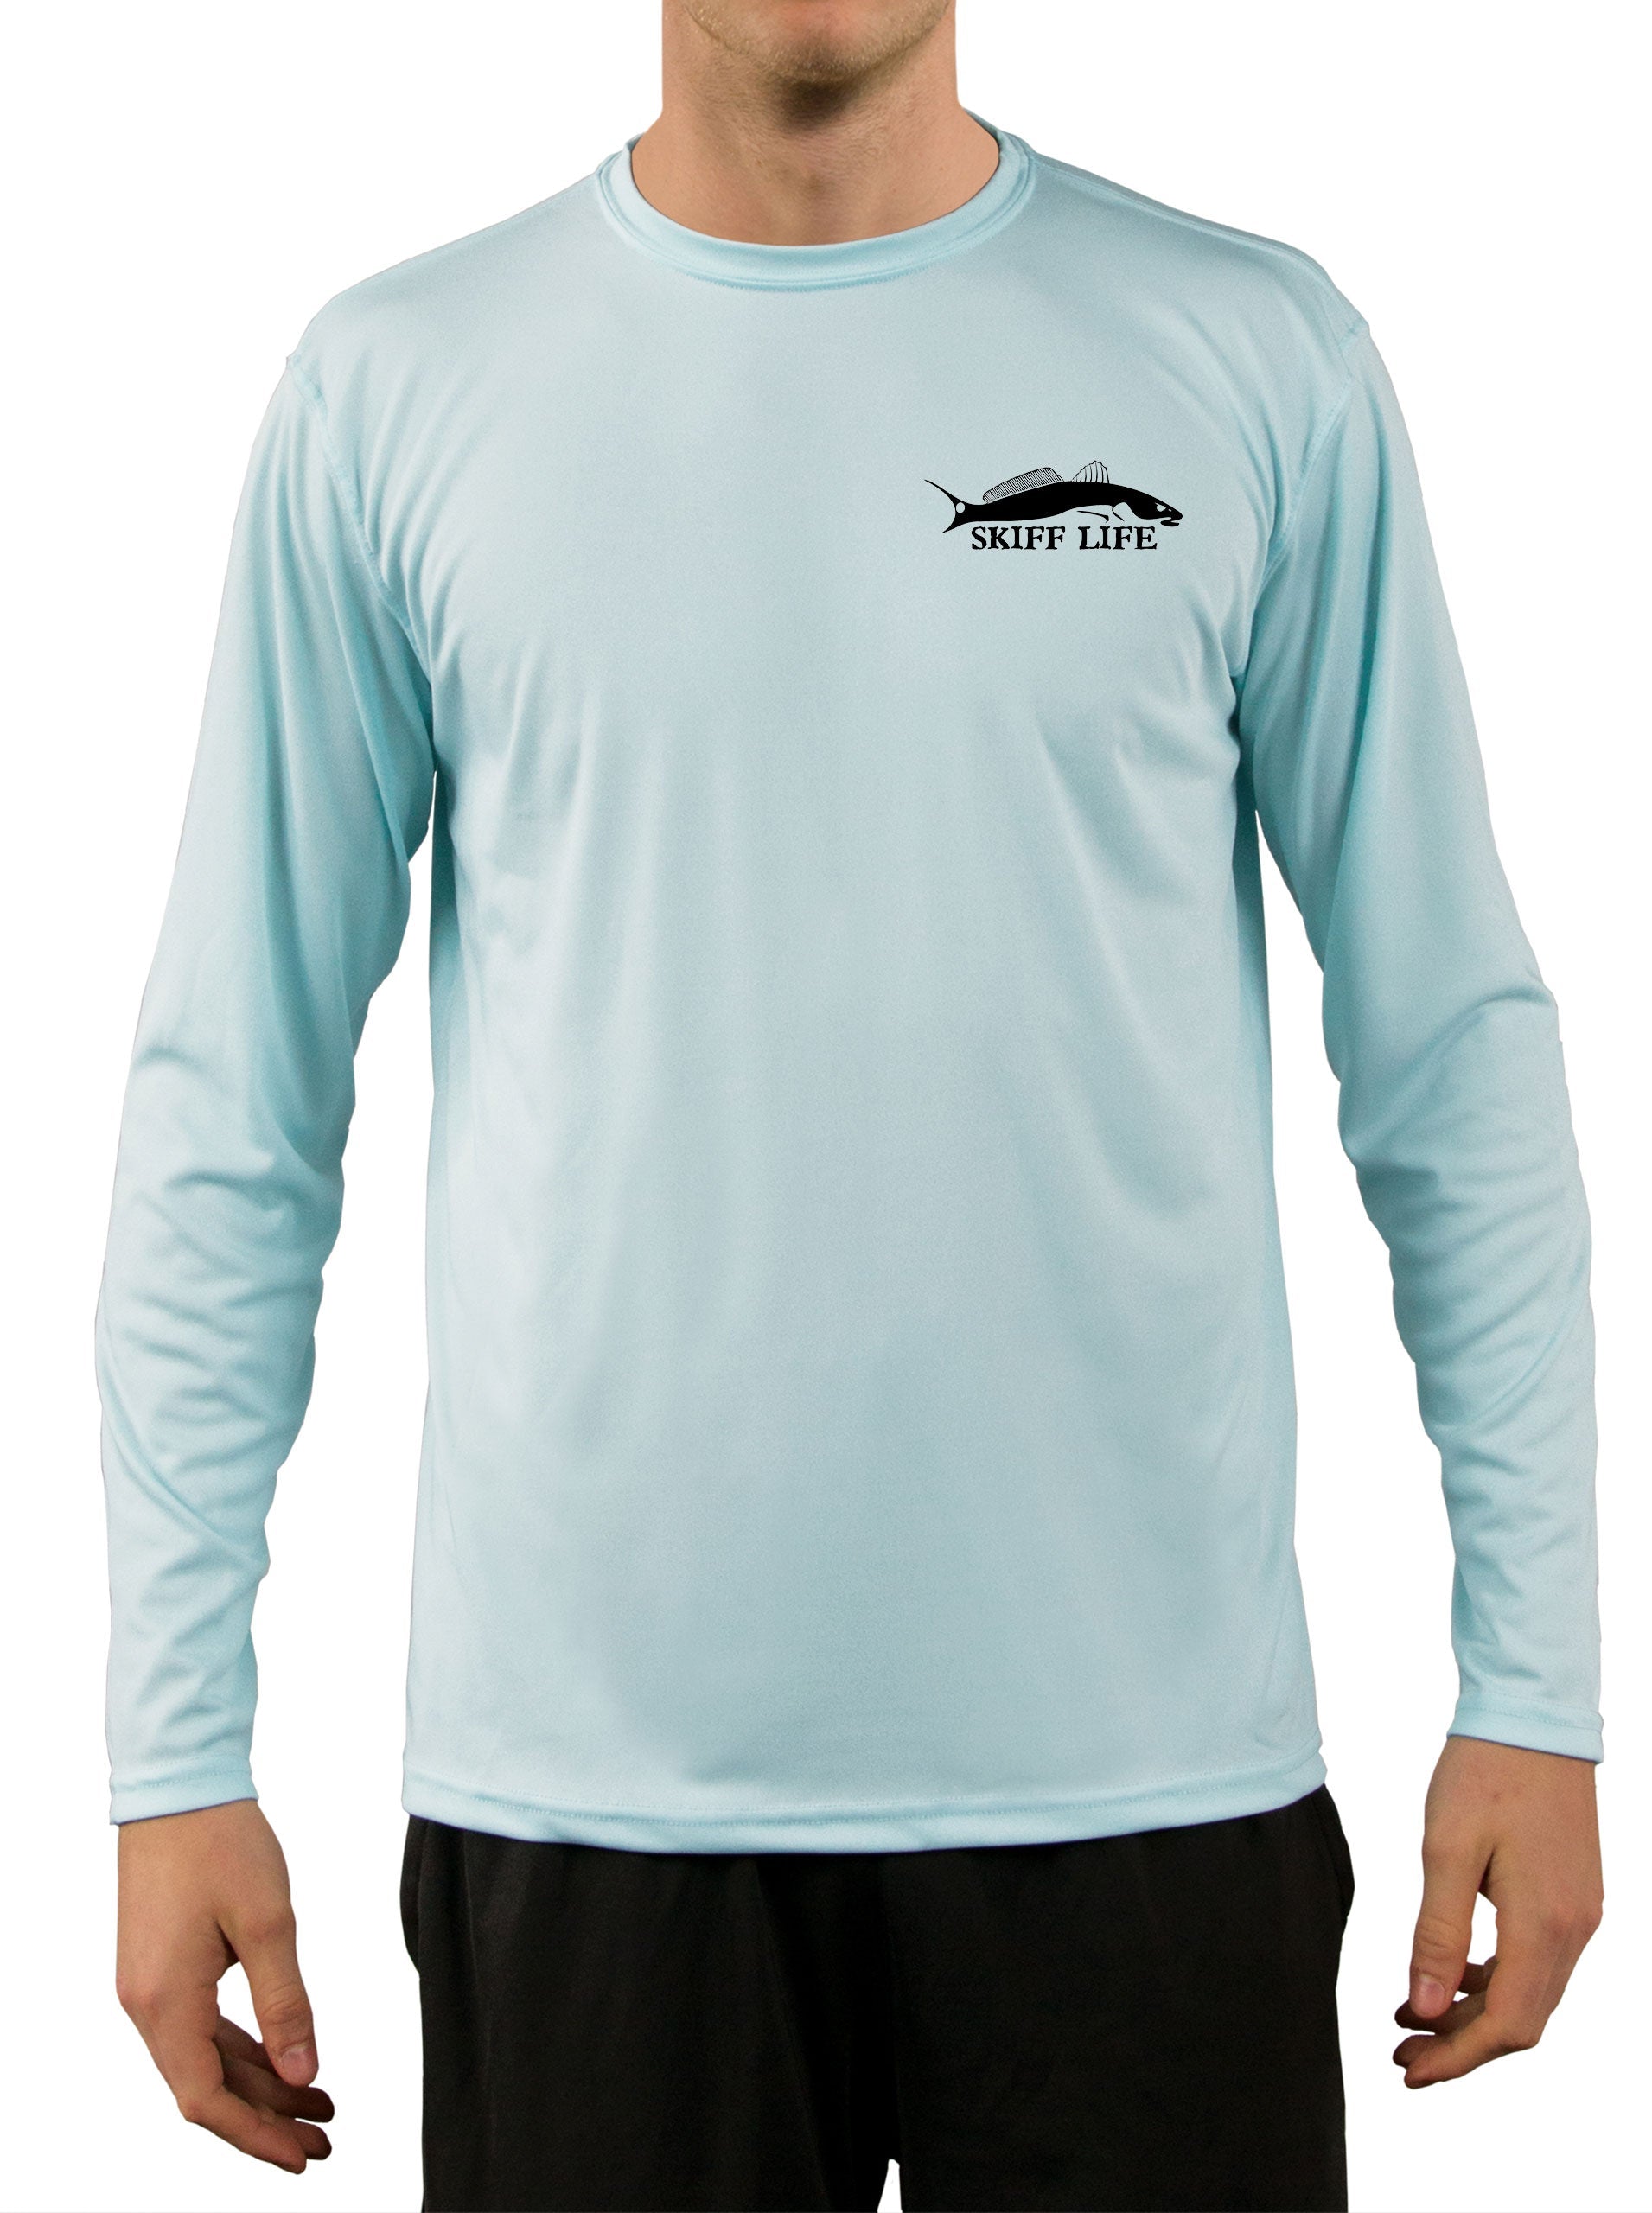 Redfish Fishing Shirts for Men Red Drum Channel Bass - UV